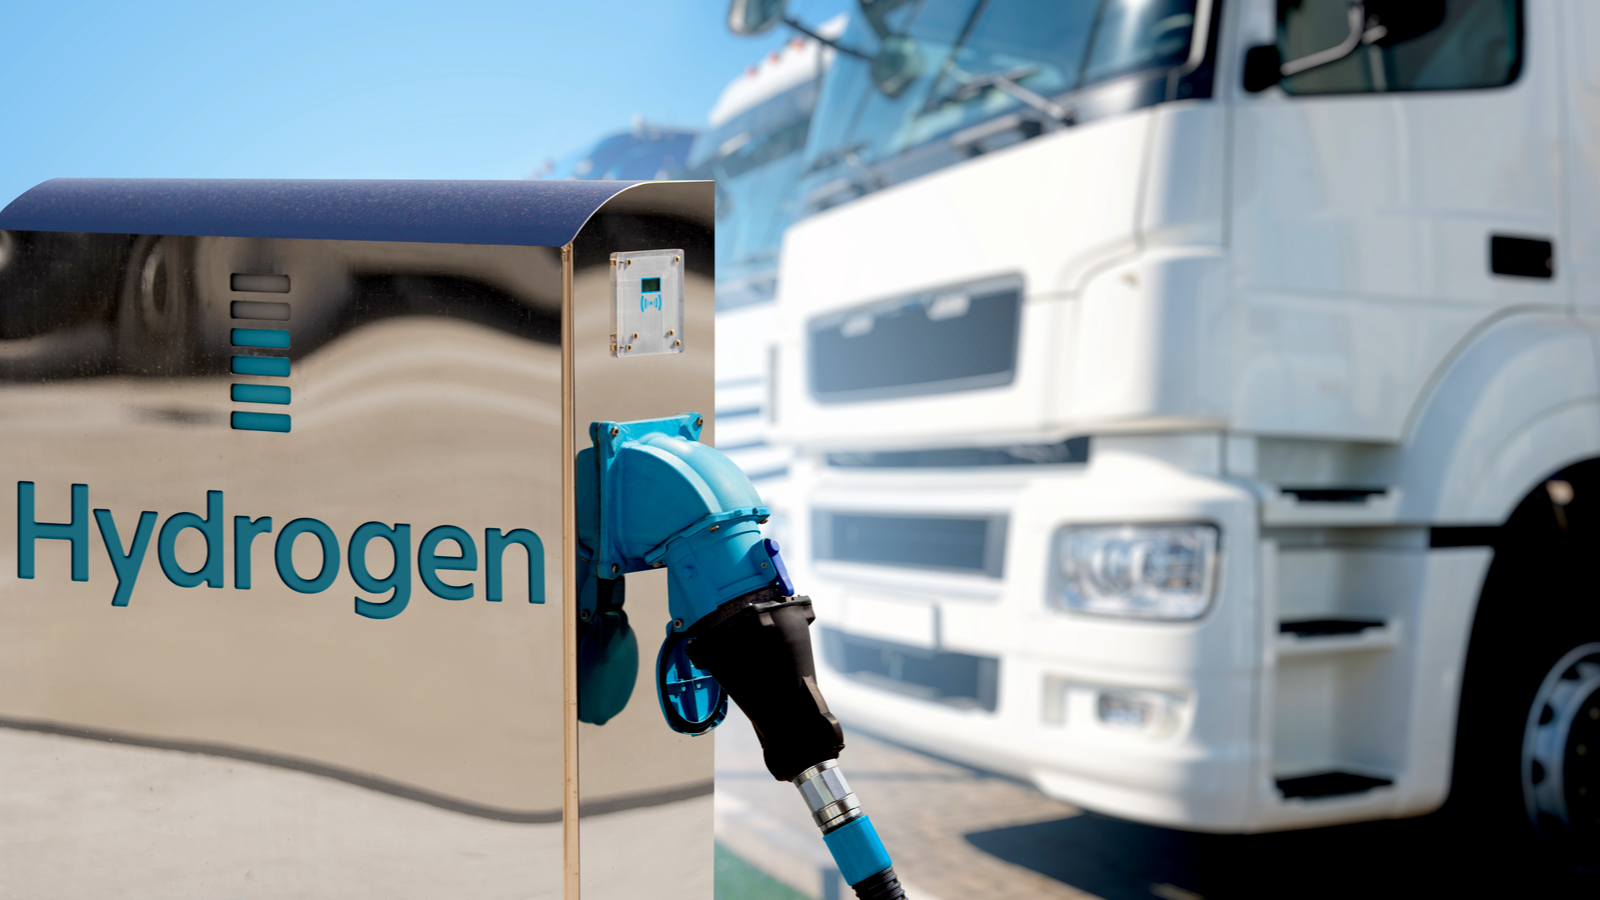 An image of a hydrogen fueling station with a truck parked in the background HTOO Stock.